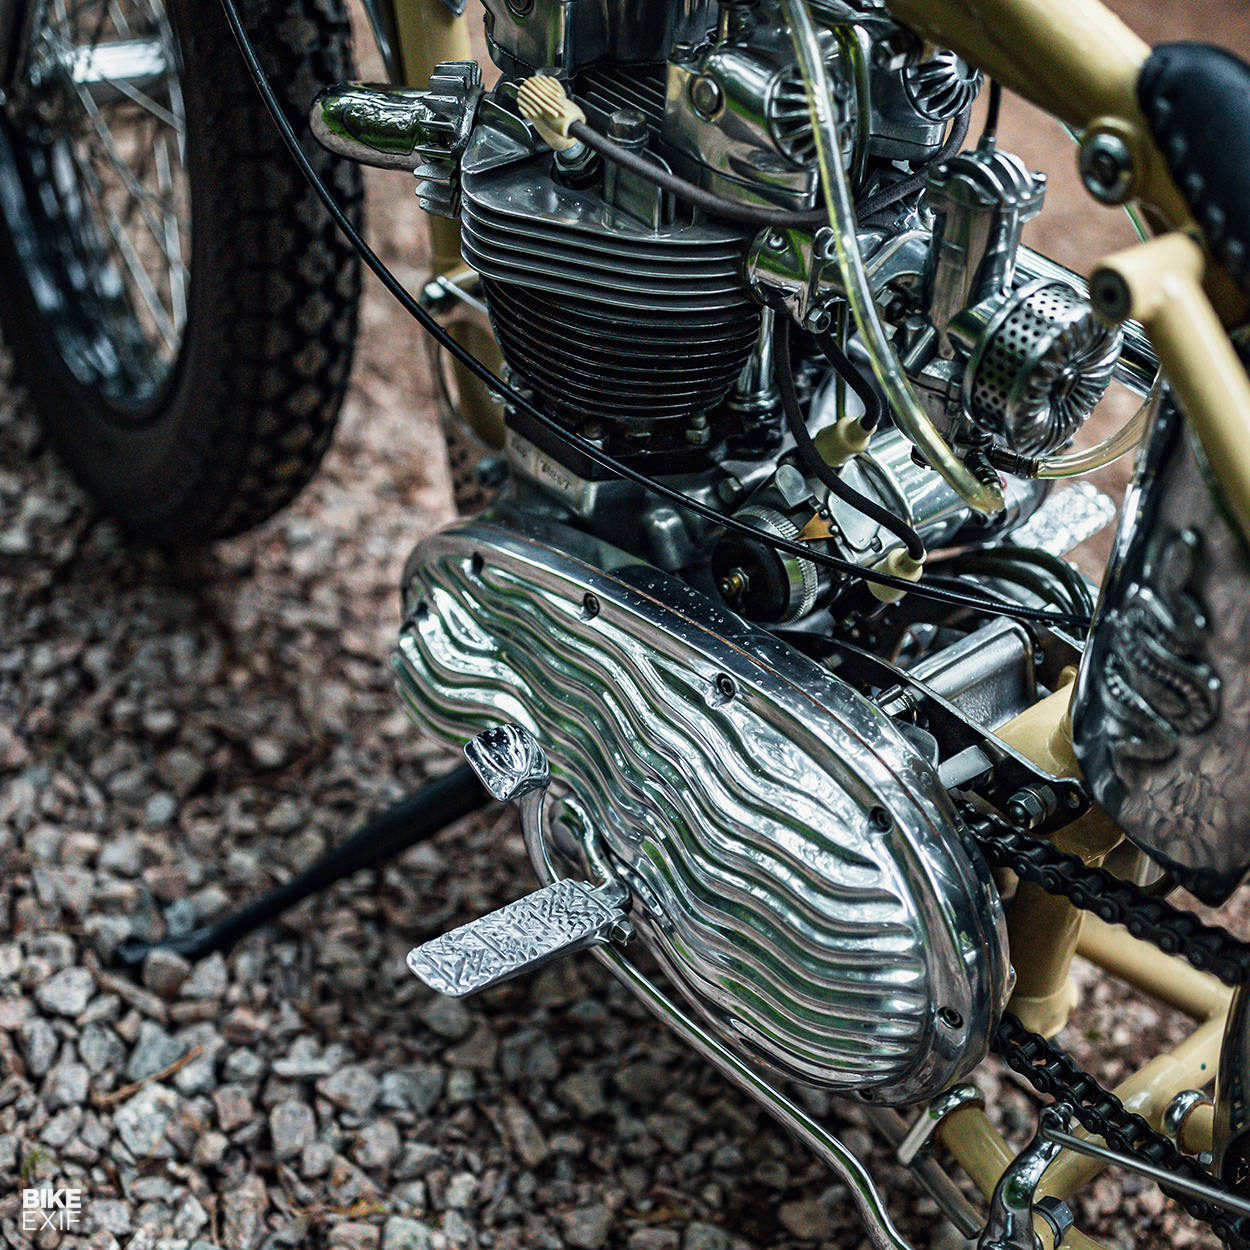 Triumph chopper by Robbie Palmer for Born Free Peoples Champ